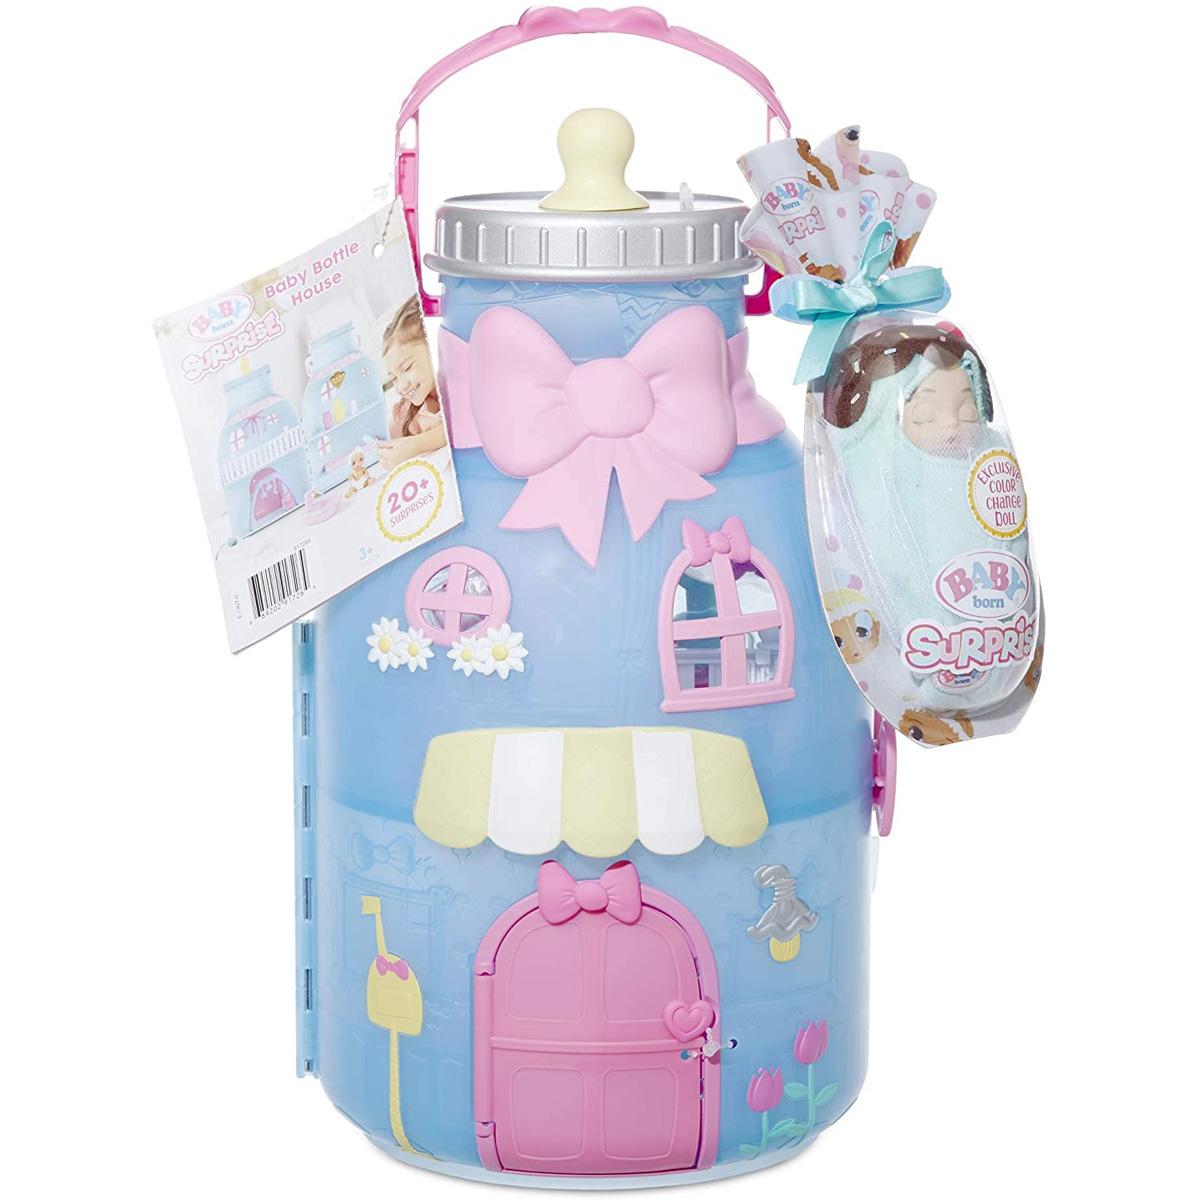 Baby Born Surprise Baby Bottle House for $15.98